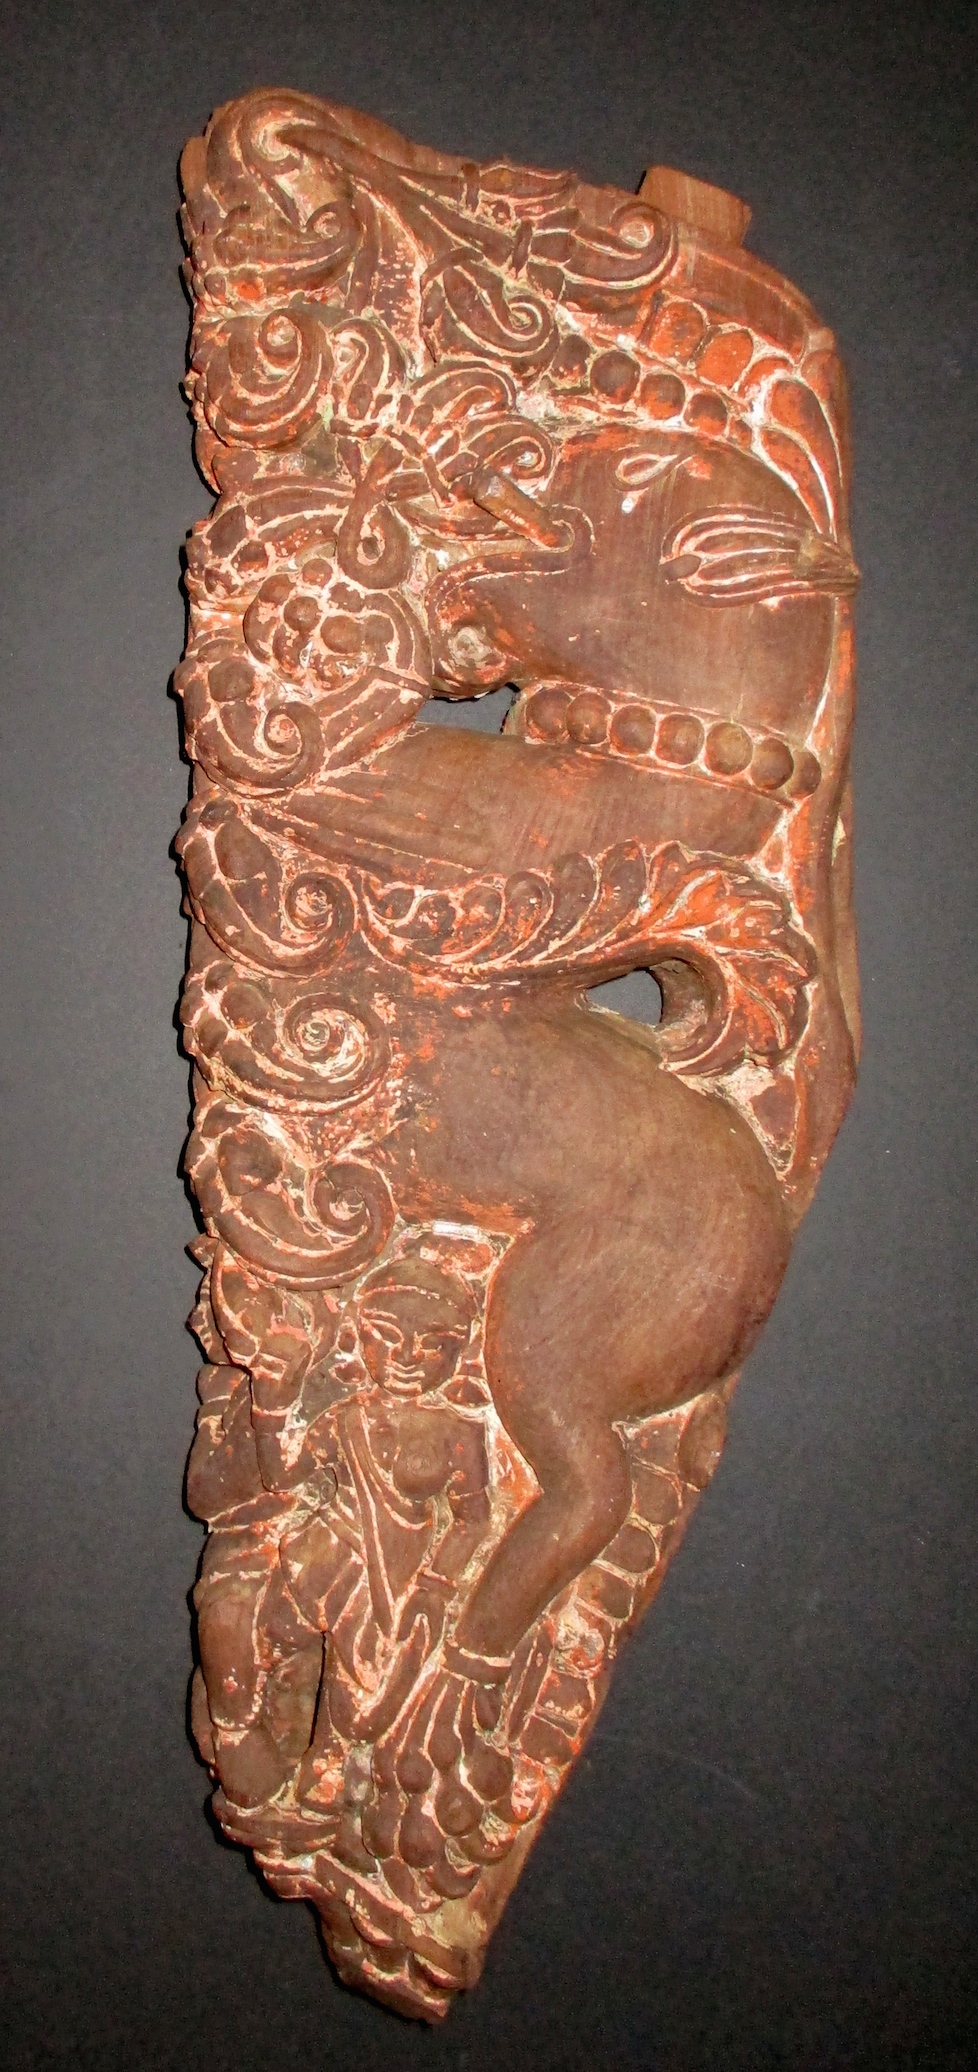 Hand-carved Figural Architectural Embellishment Salvaged from India (27" L x 7" W x 5"D)